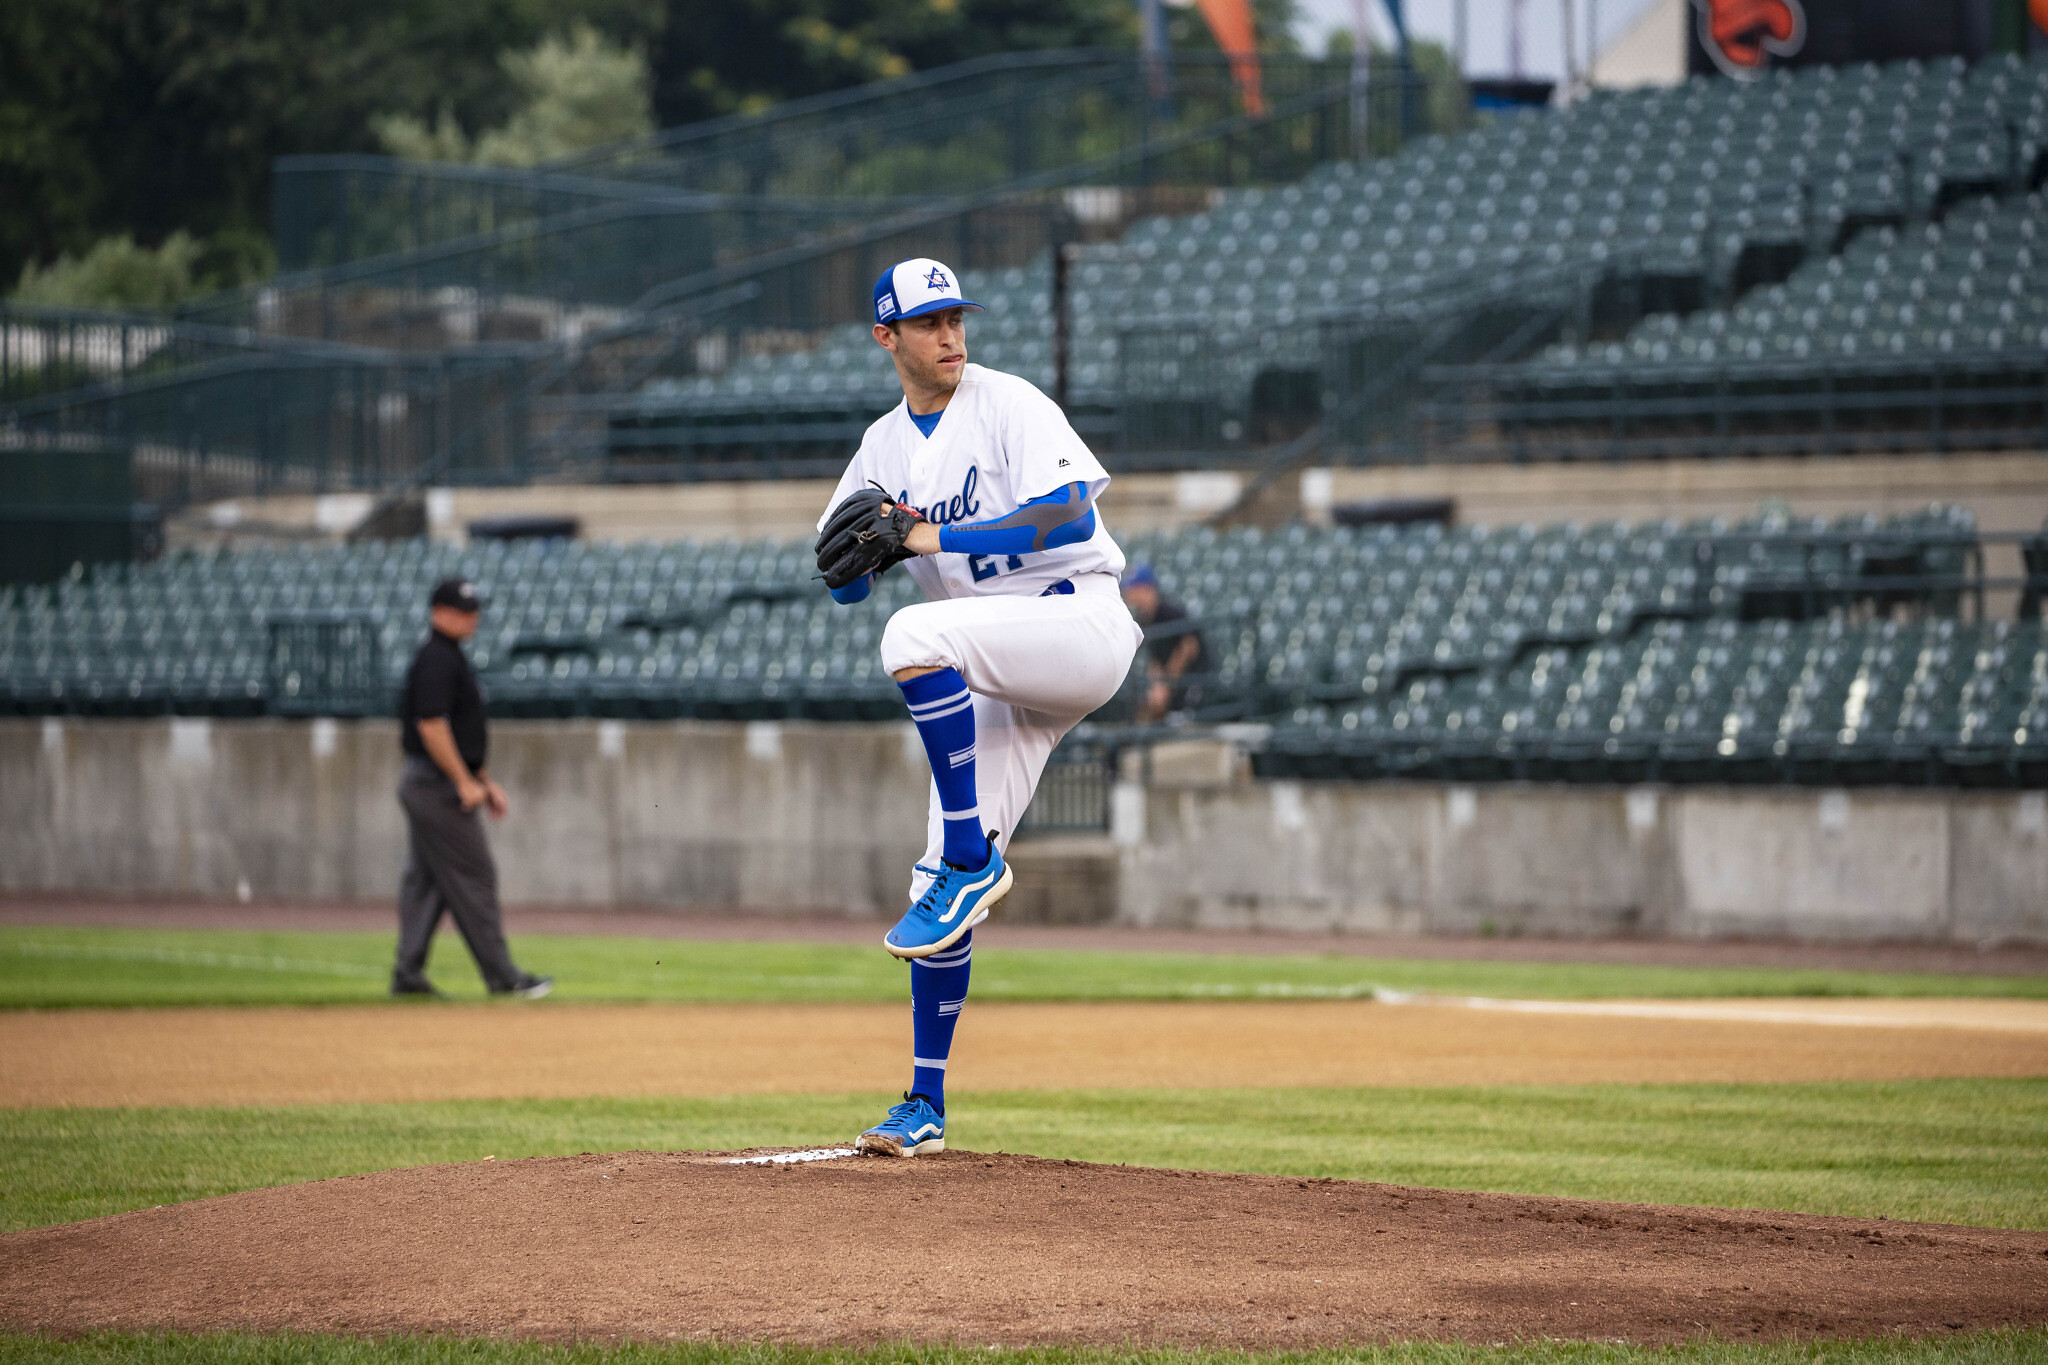 Jon Moscot pitching for Team Israel in this undated photo. (Courtesy IAB)